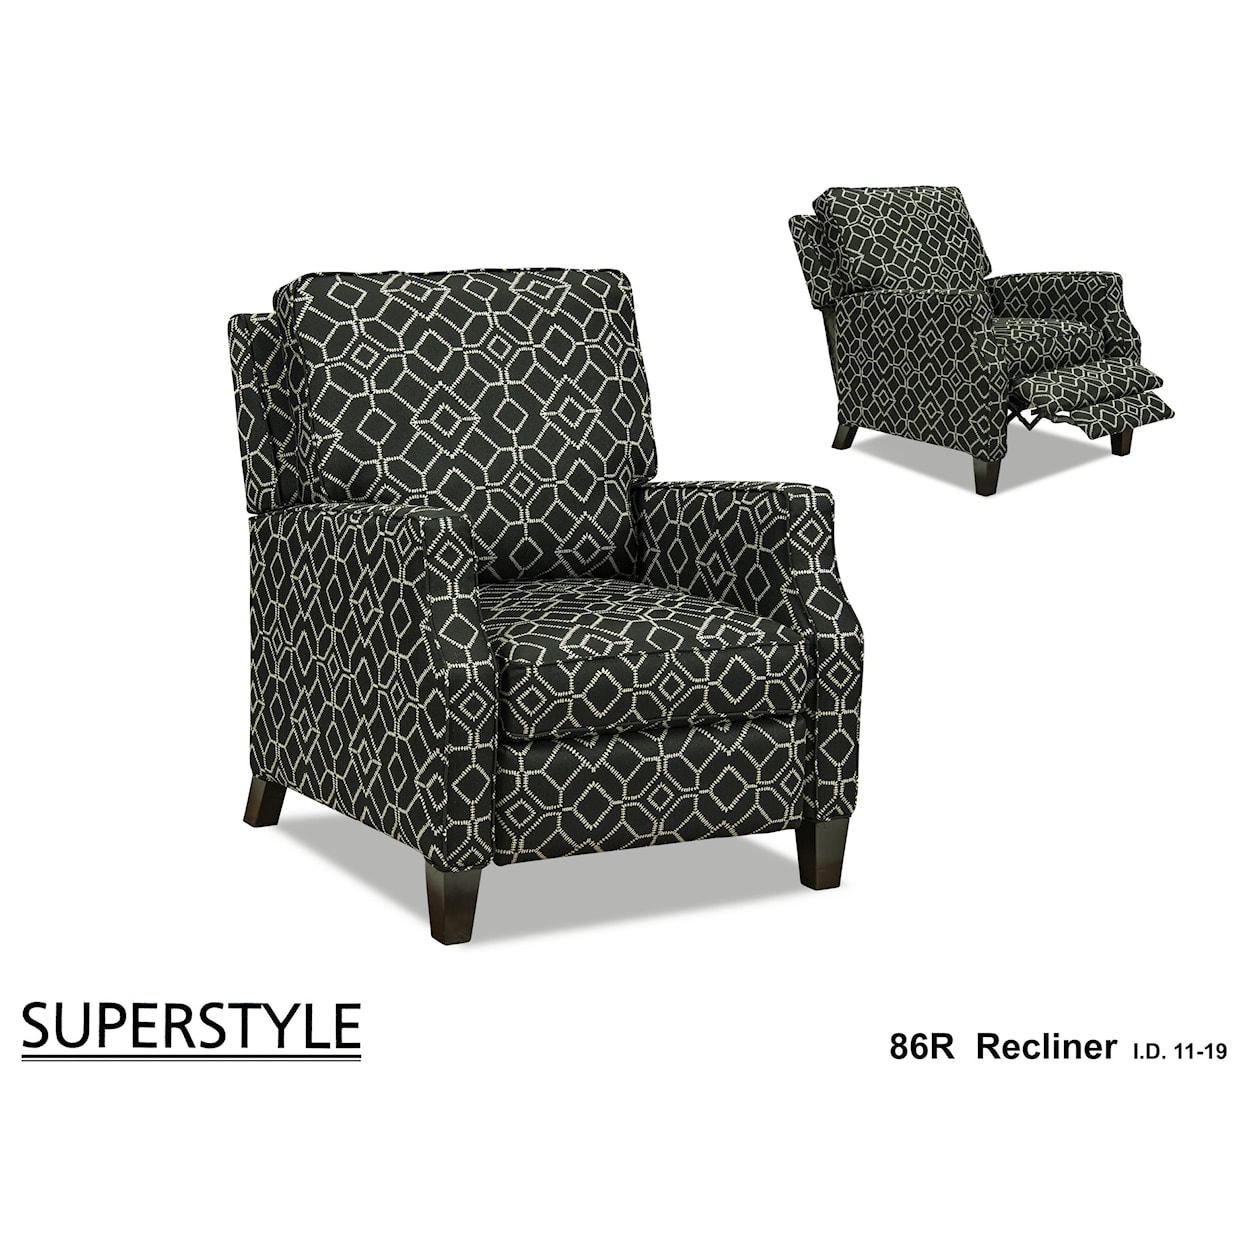 Superstyle 86R Jessica Recliner